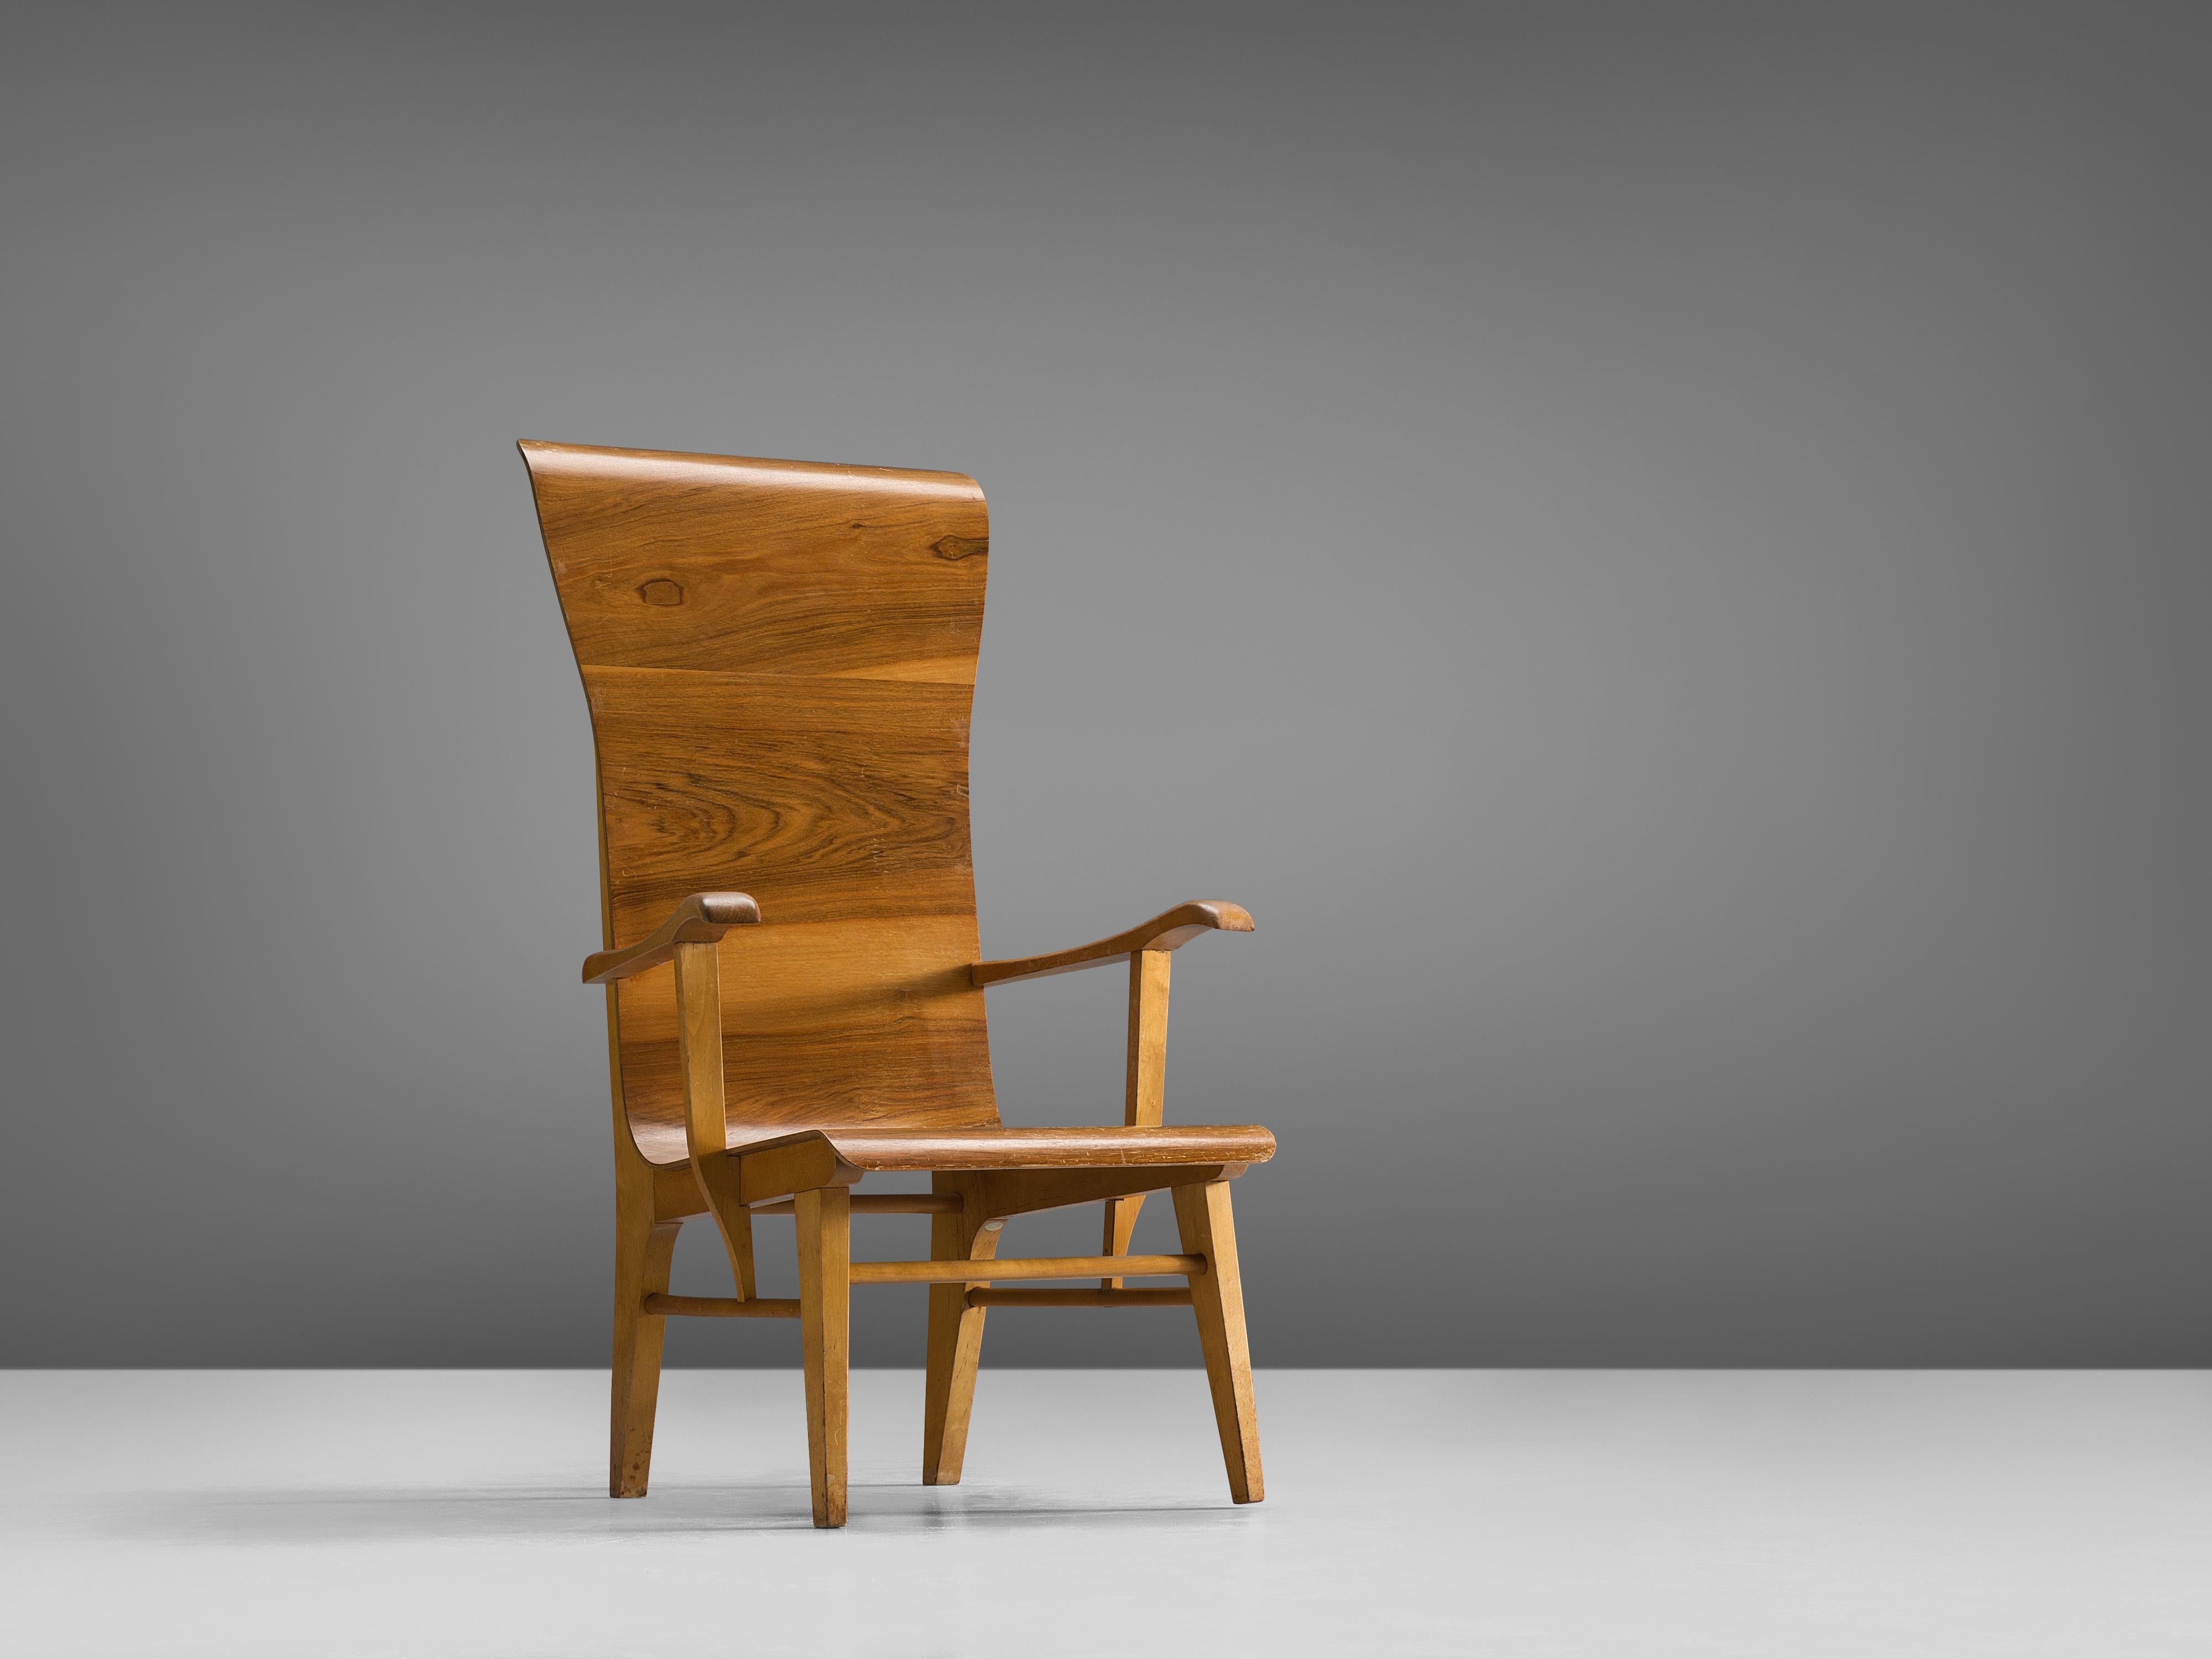 Auke Komter for Metz & Co, chair, beech plywood and beech, the Netherlands, 1930s.

This stately chair is made from a solid beech frame with bend plywood shell that flows from the seat to the back. Komter was inspired by the designs of Alvar Aalto